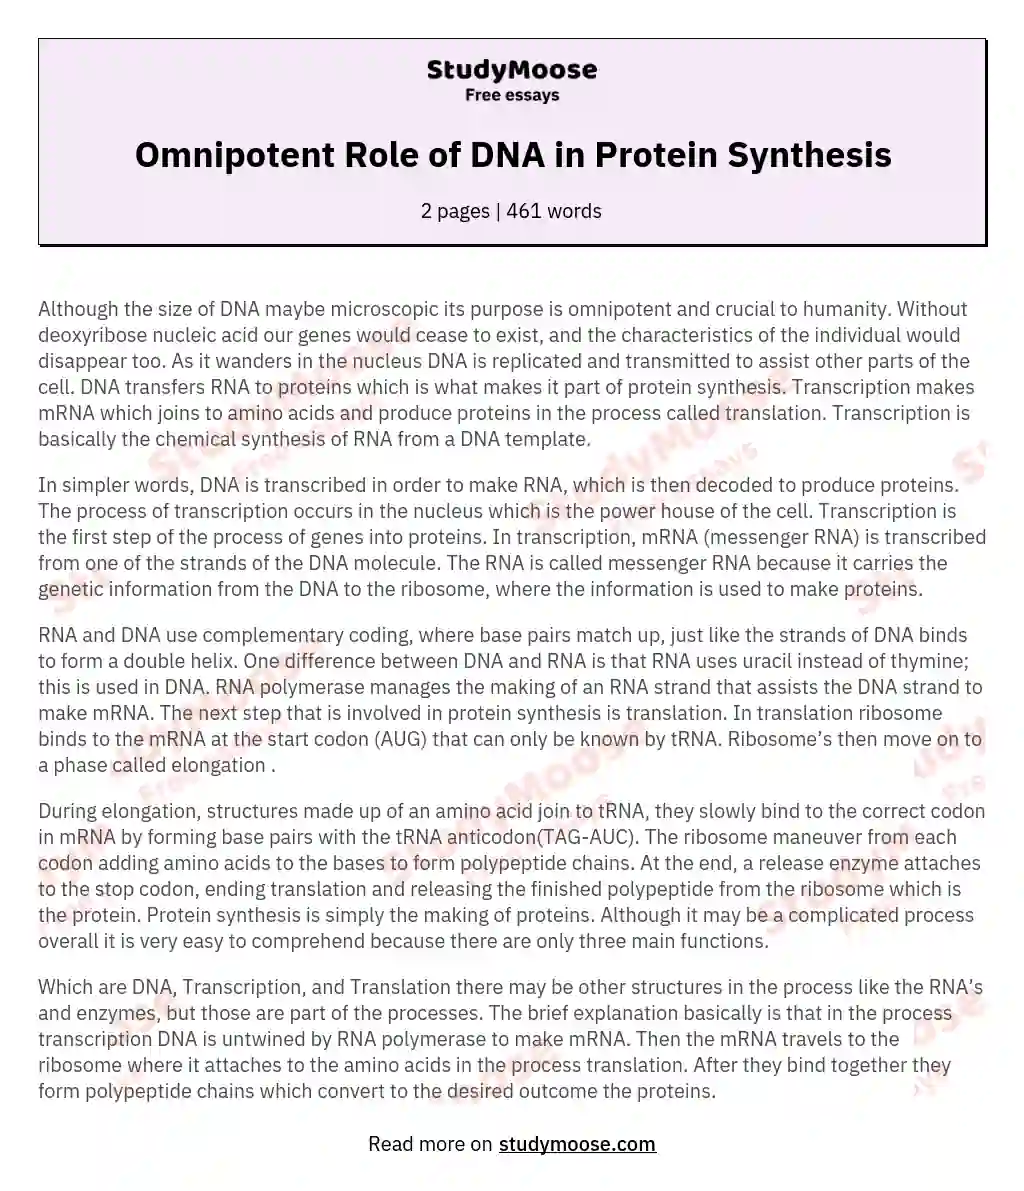 Omnipotent Role of DNA in Protein Synthesis essay